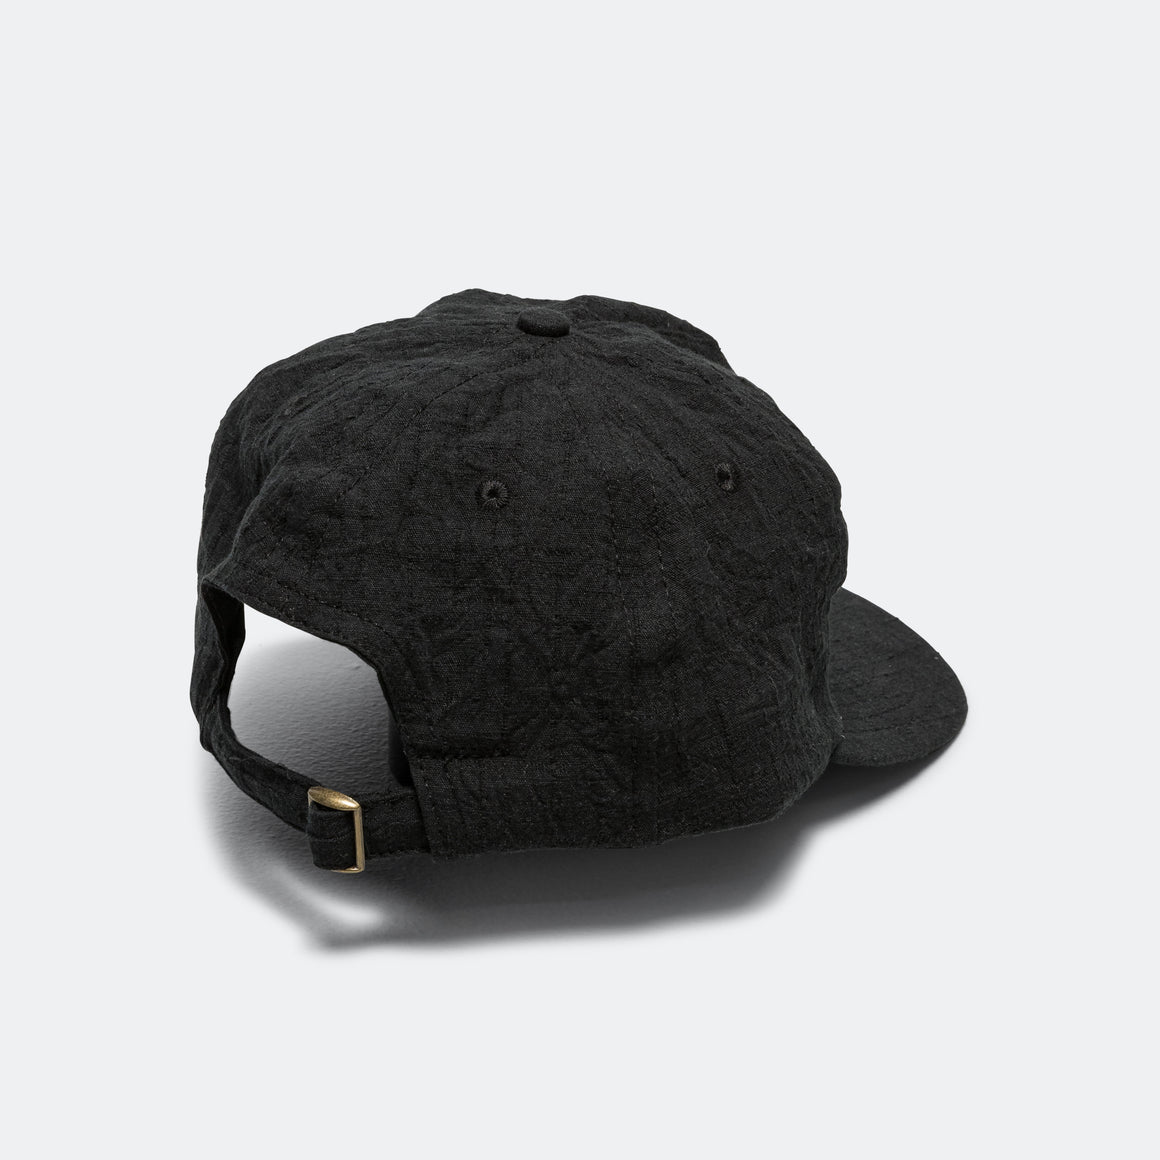 Lite Year - 5 Panel Cap "NY" - Black - UP THERE